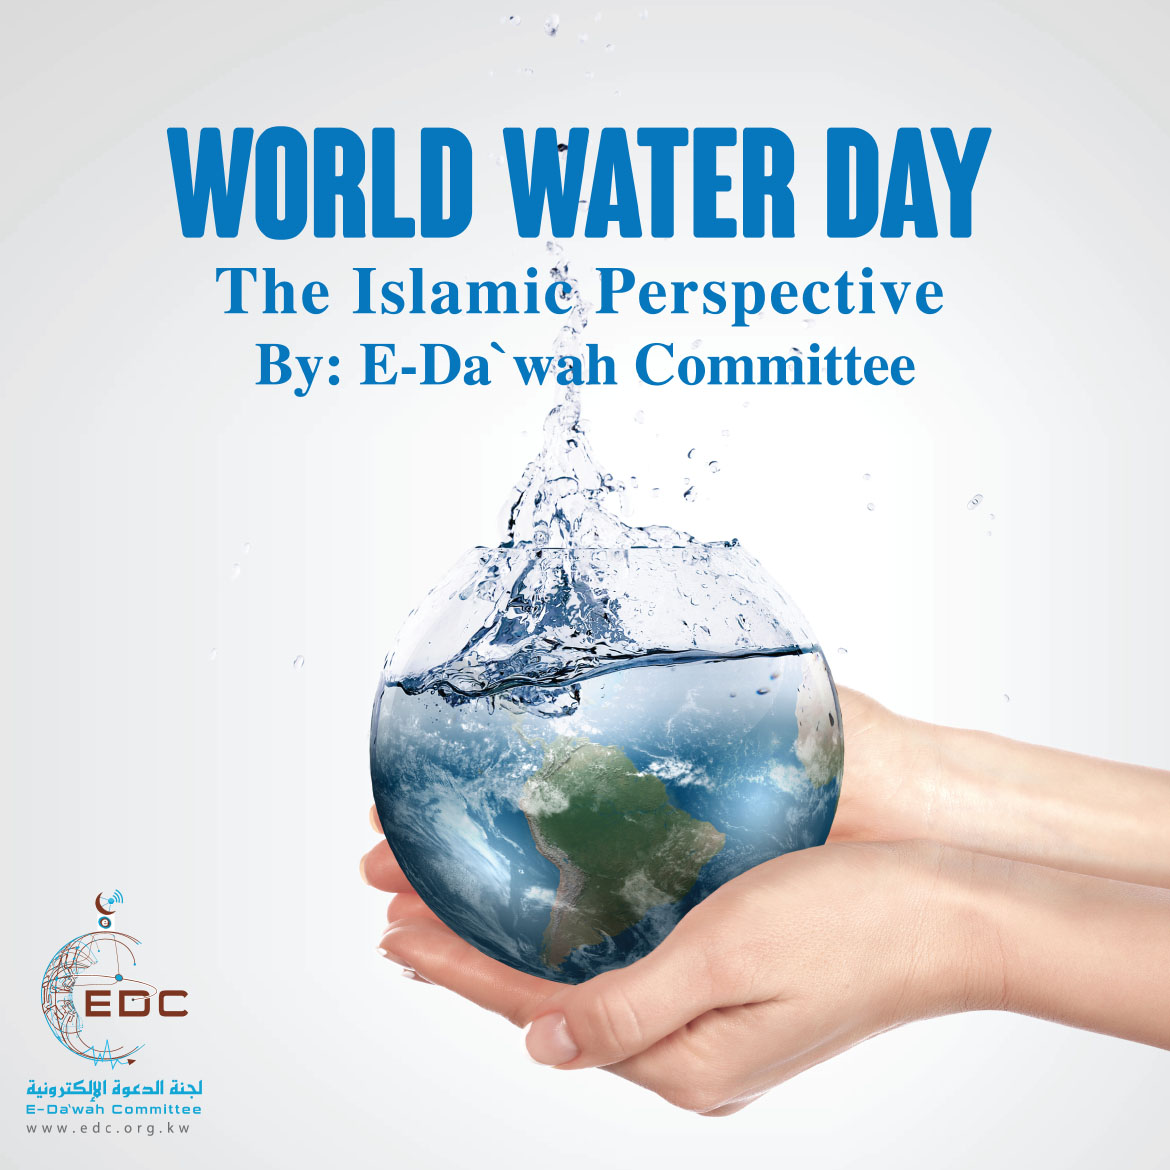 en_Word_Water_Day_The_Islamic_Perspective-1